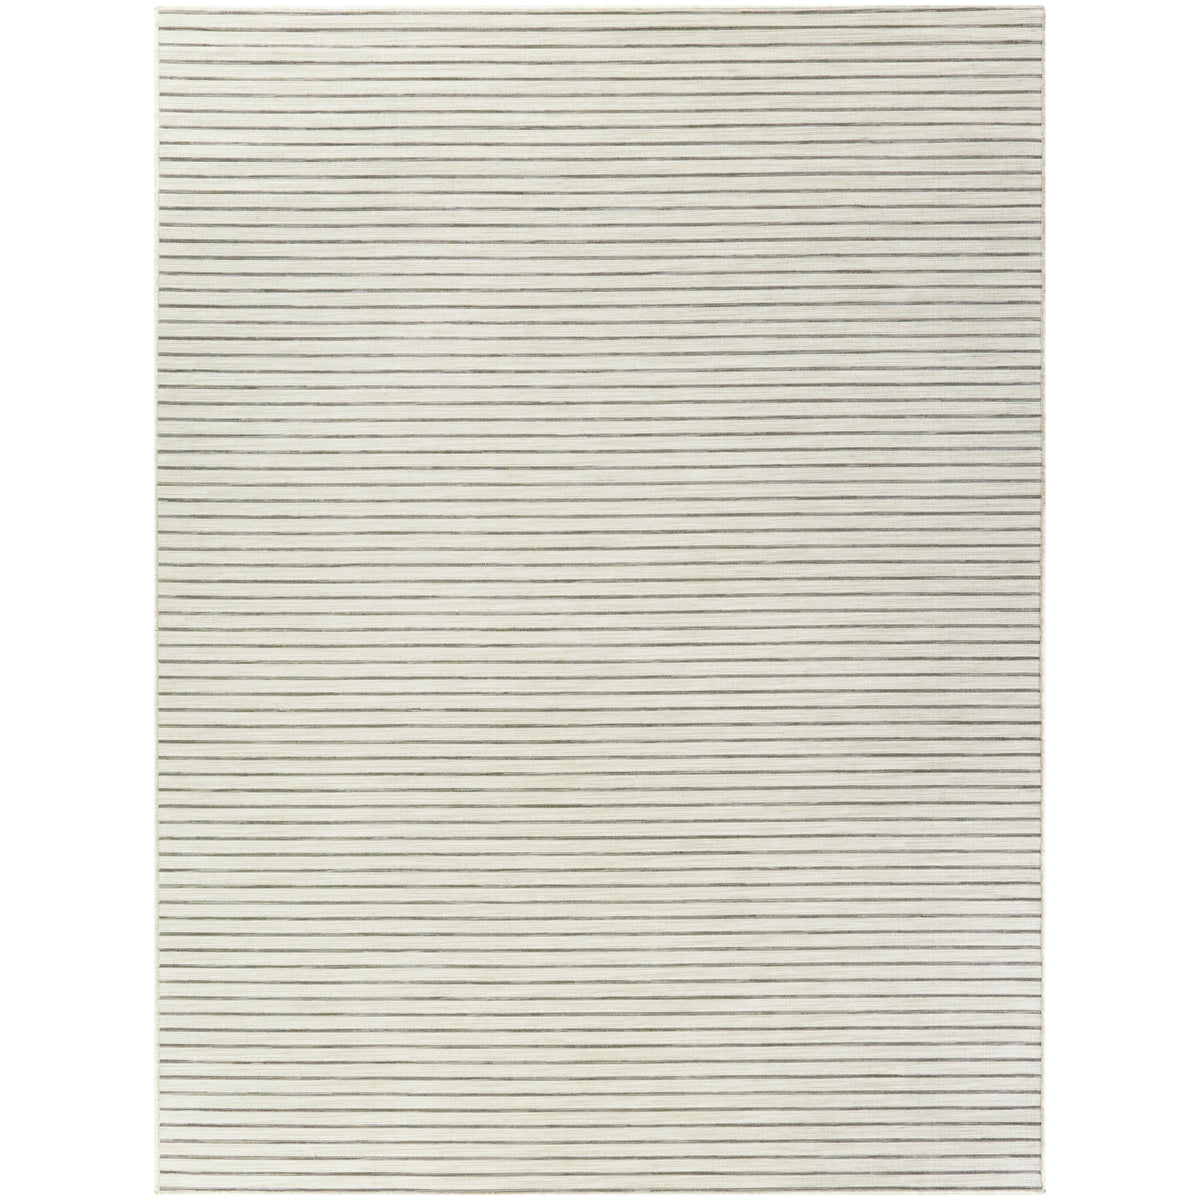 Barbery Striped Reversible Area Rug